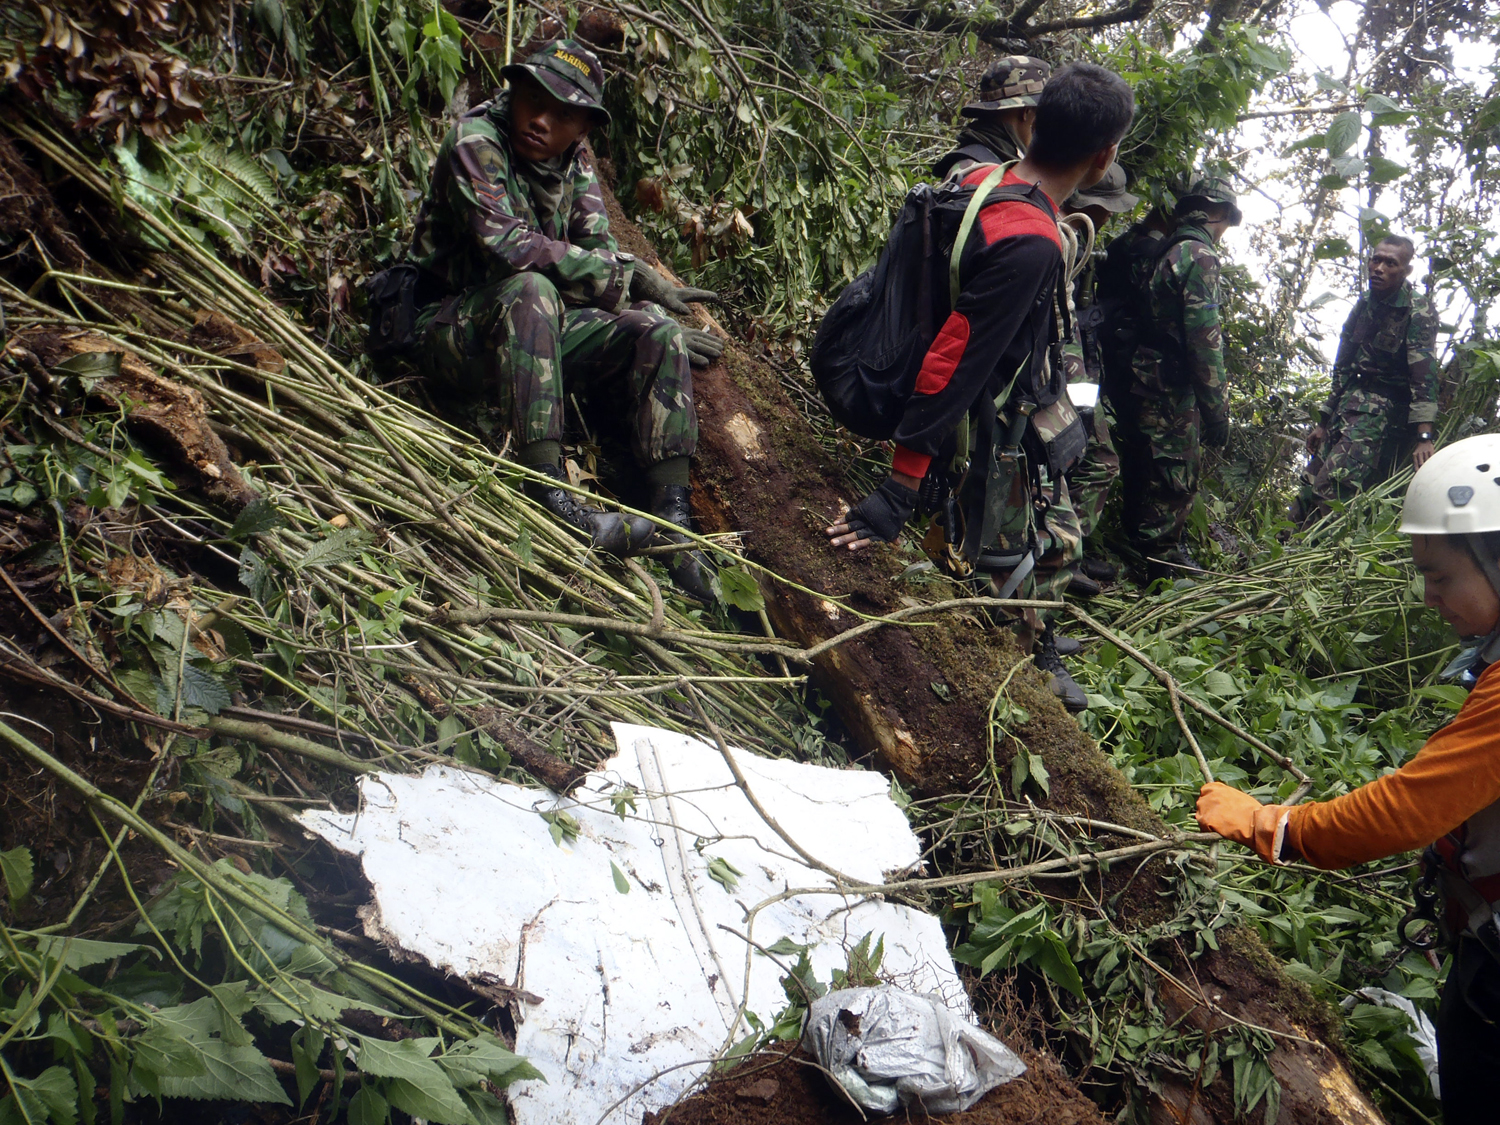 An Indonesian soldier, part of a rescue team, sits near the wreckage of a Russian Sukhoi aircraft on the slope of Mount Salak, near Bogor May 11, 2012. A rescue team found no survivors but several bodies on Thursday when it arrived at the wreckage of